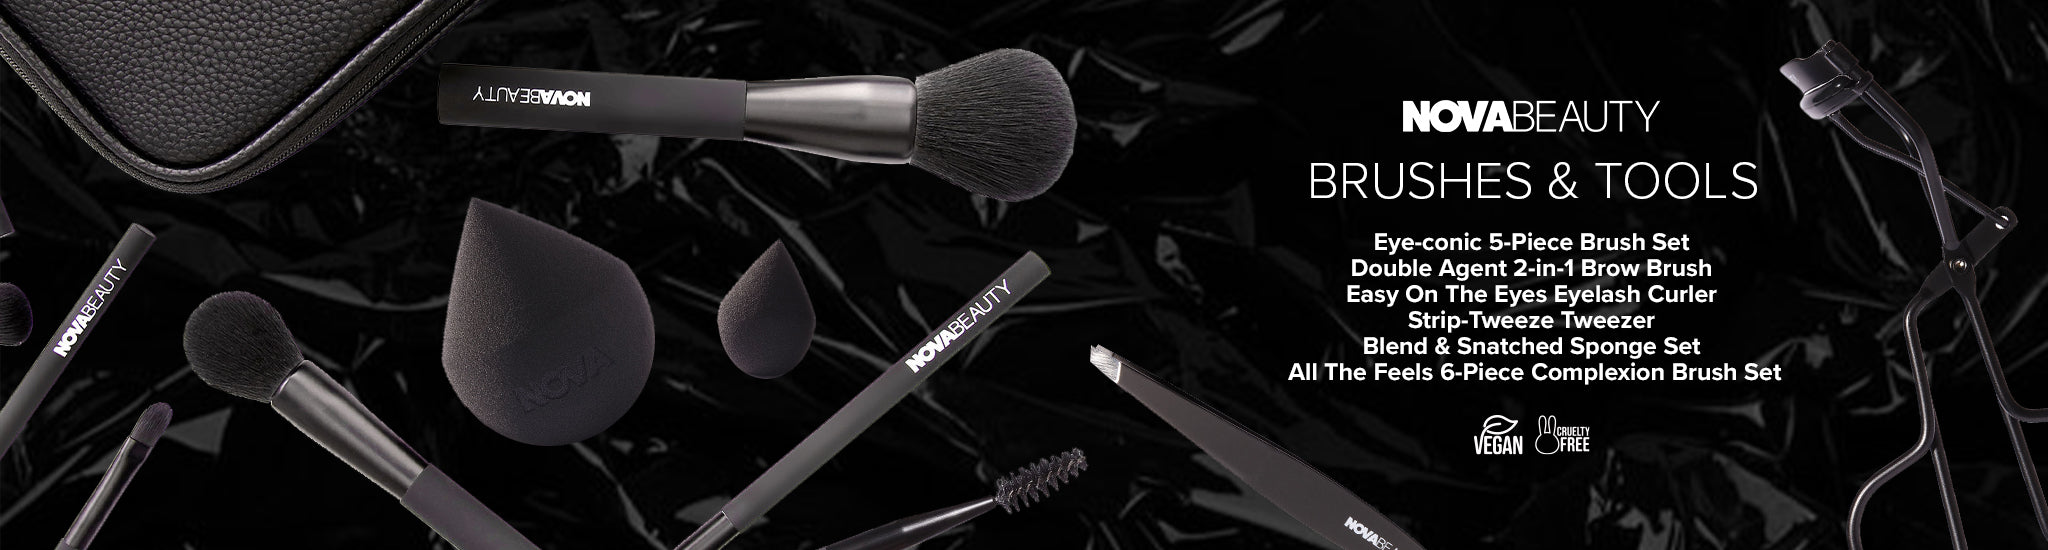 NOVABEAUTY BRUSHES AND TOOLS